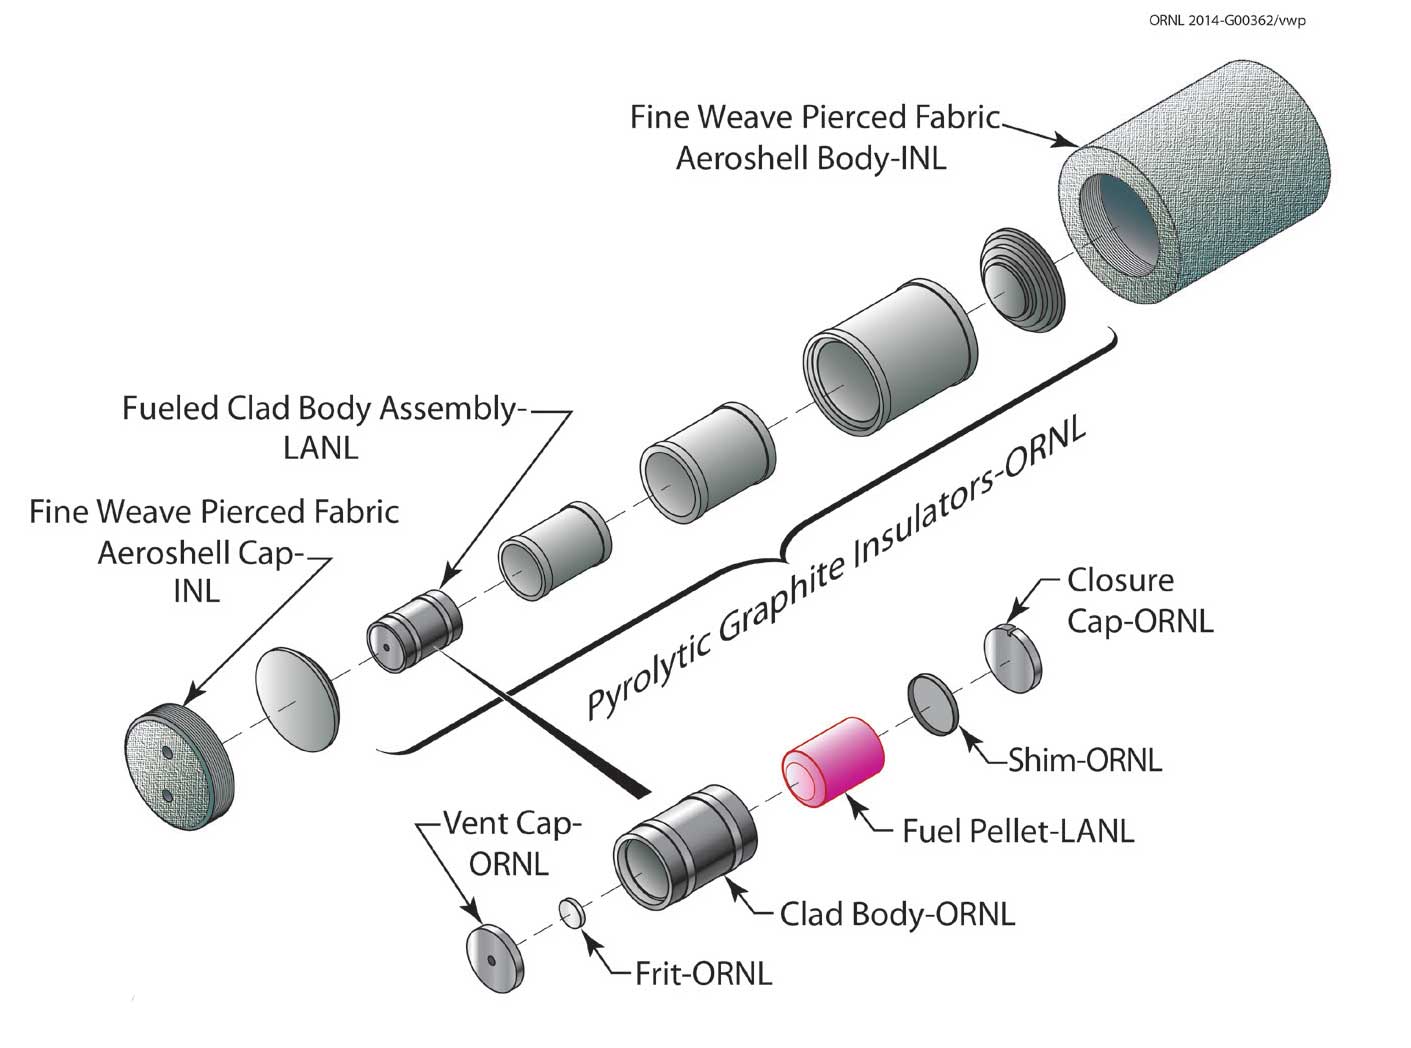 An expanded illustration shows the individual components surrounding the plutonium in center.